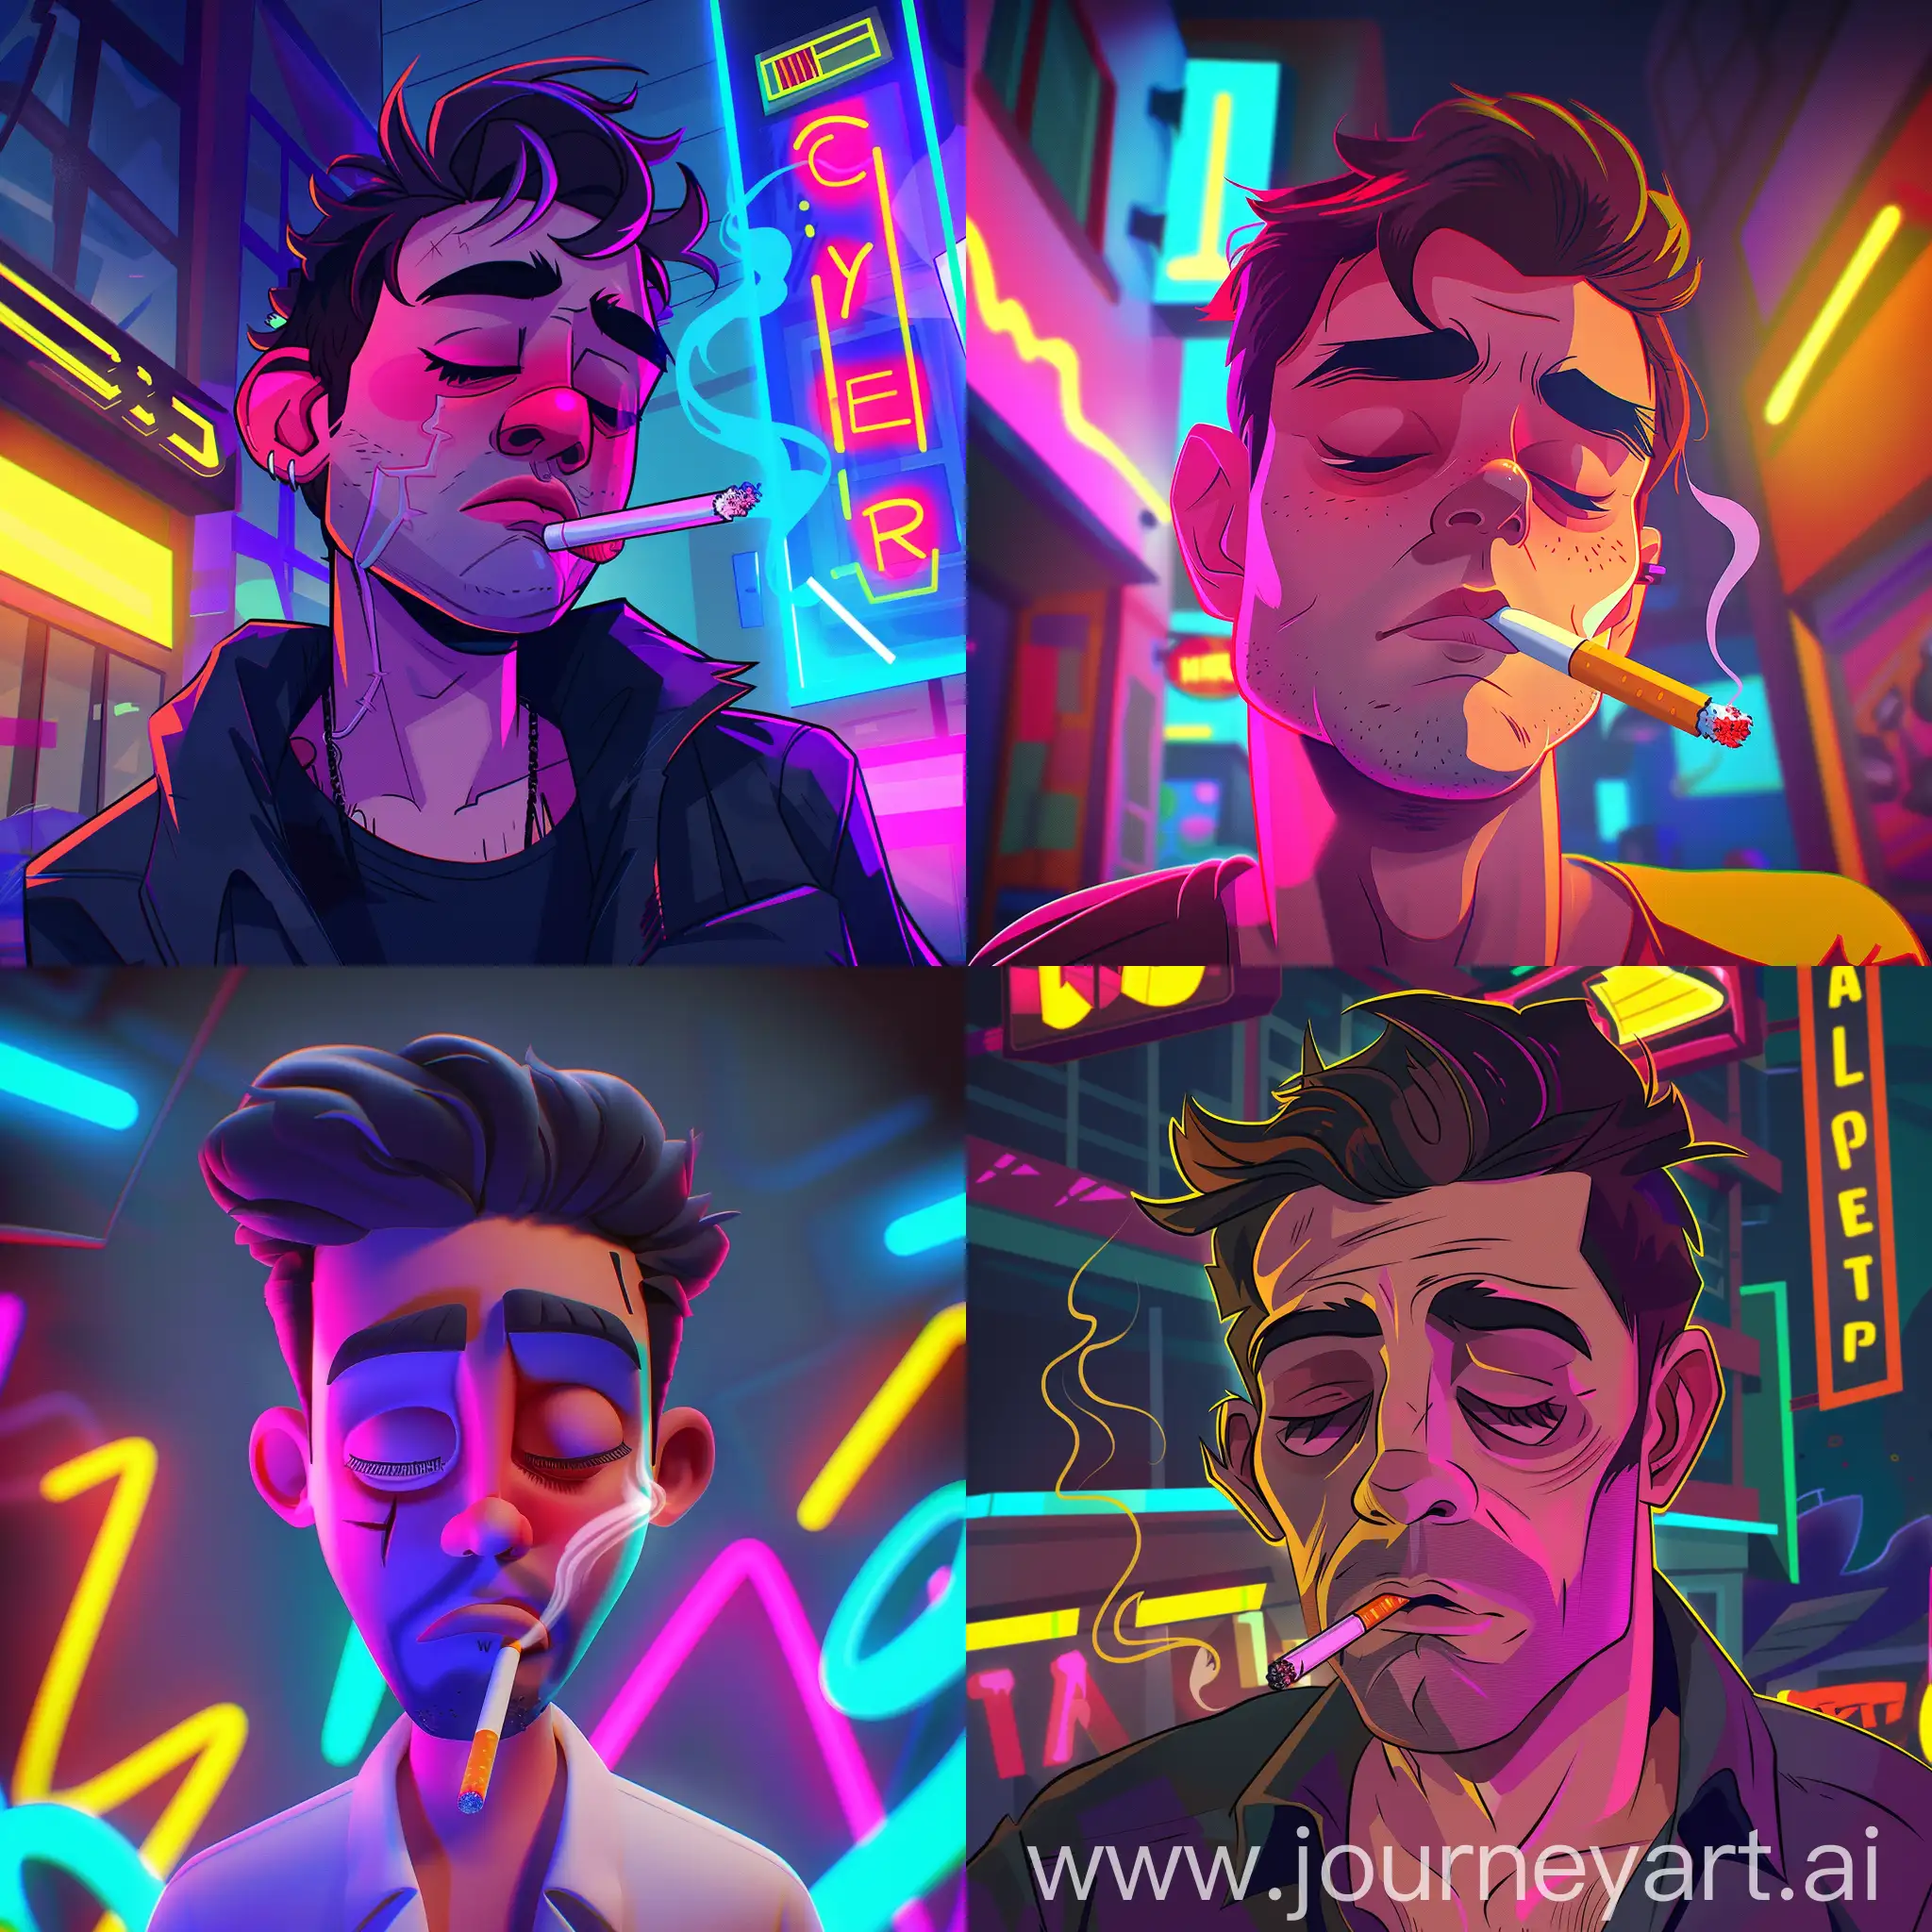 generate an image of a cartoon character tired from his 9-5 work, smoking a ciggarette. His under-eyes are puffy from lack of sleep. Scene should be set at nighttime with bright neon lights surrounding him